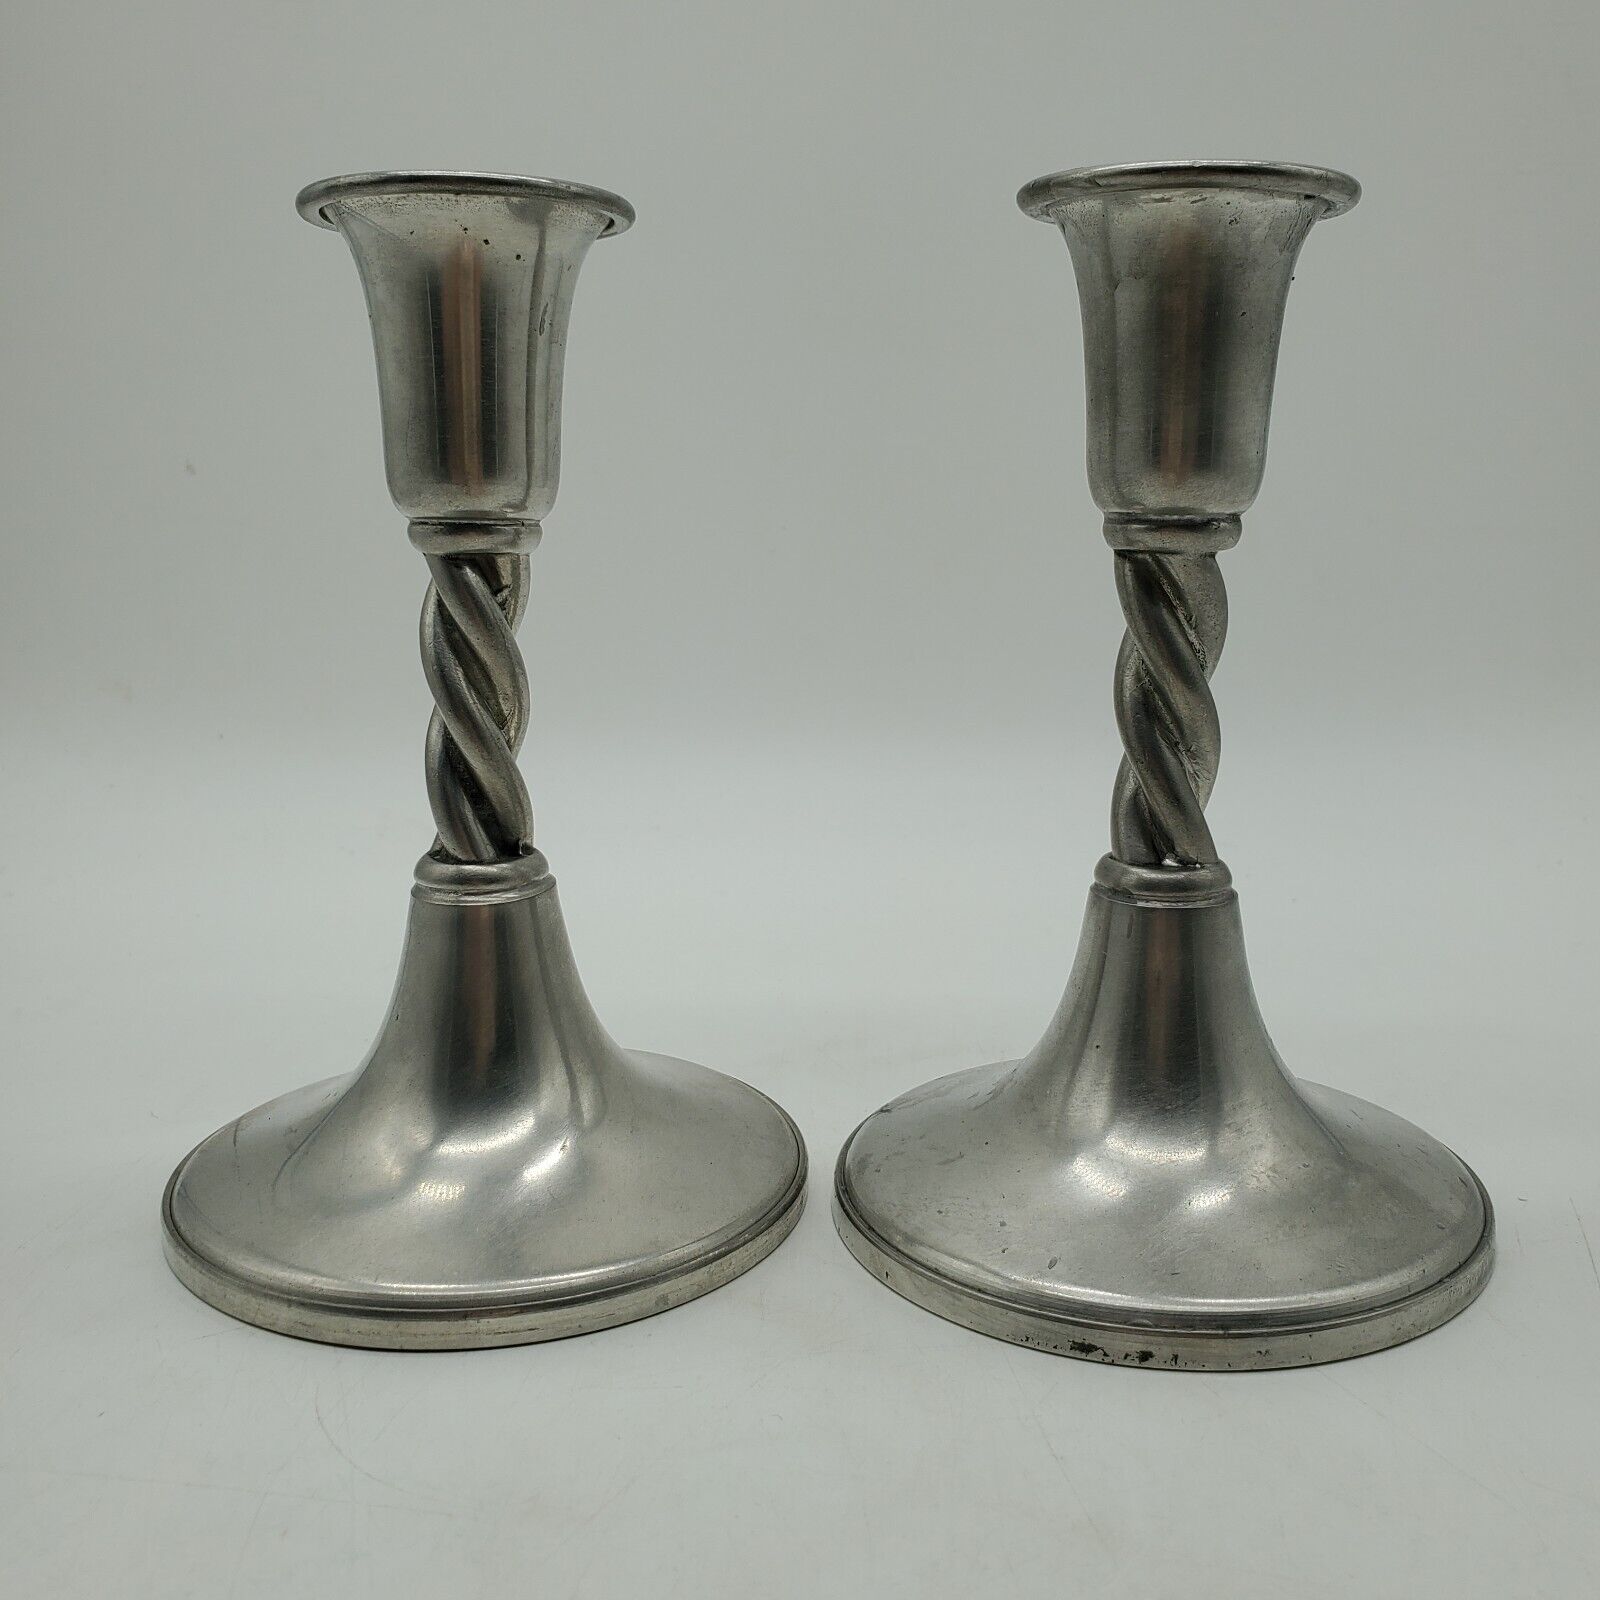 Woodbury Pewter Twisted Candle Holders 2 Pieces 5.75 Inches Tall Taper Candles